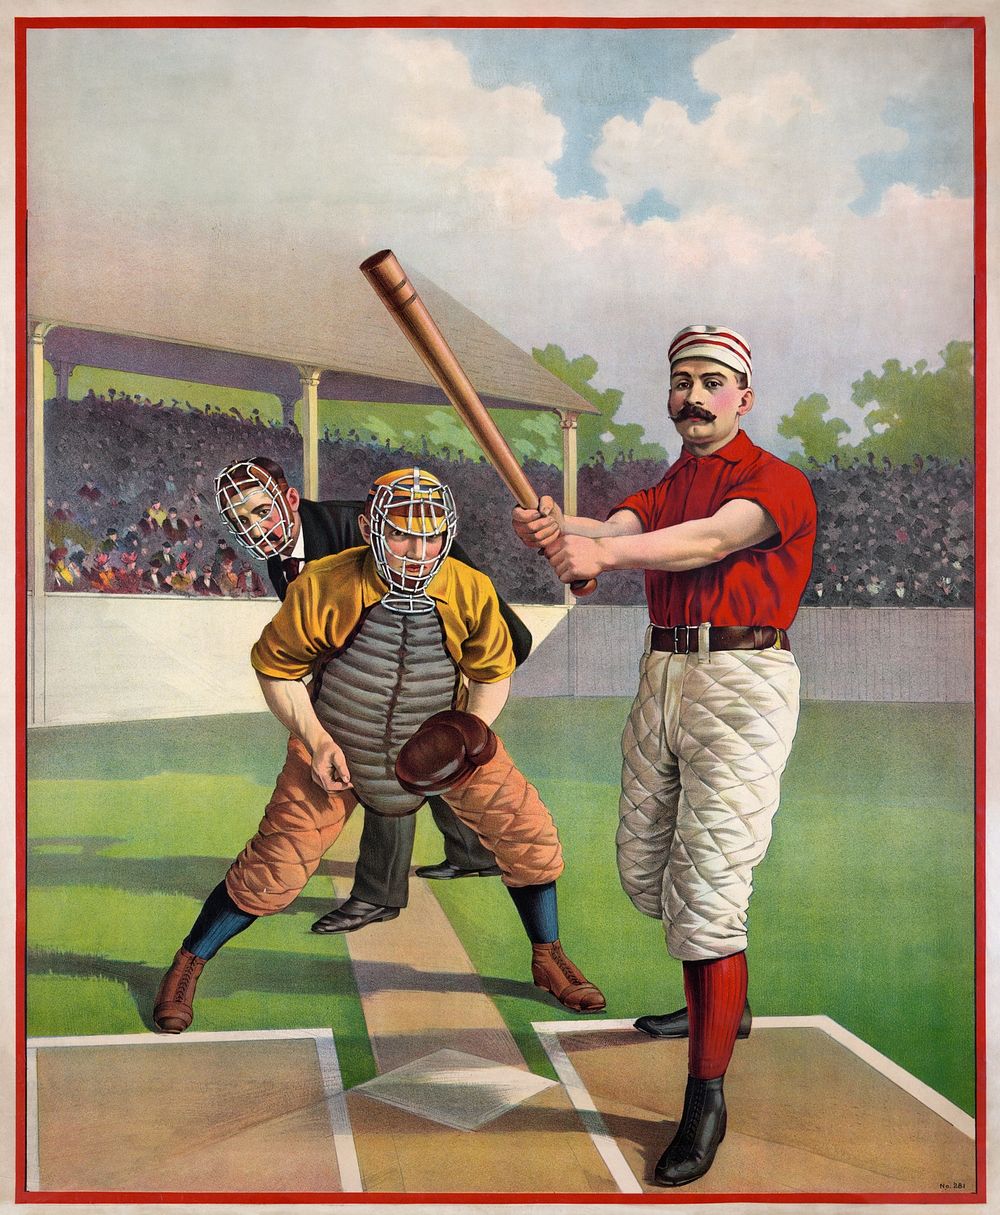 Full sheet baseball poster no. 281 (1895) by Calvert Lithographing Co. Original public domain image from the Library of…